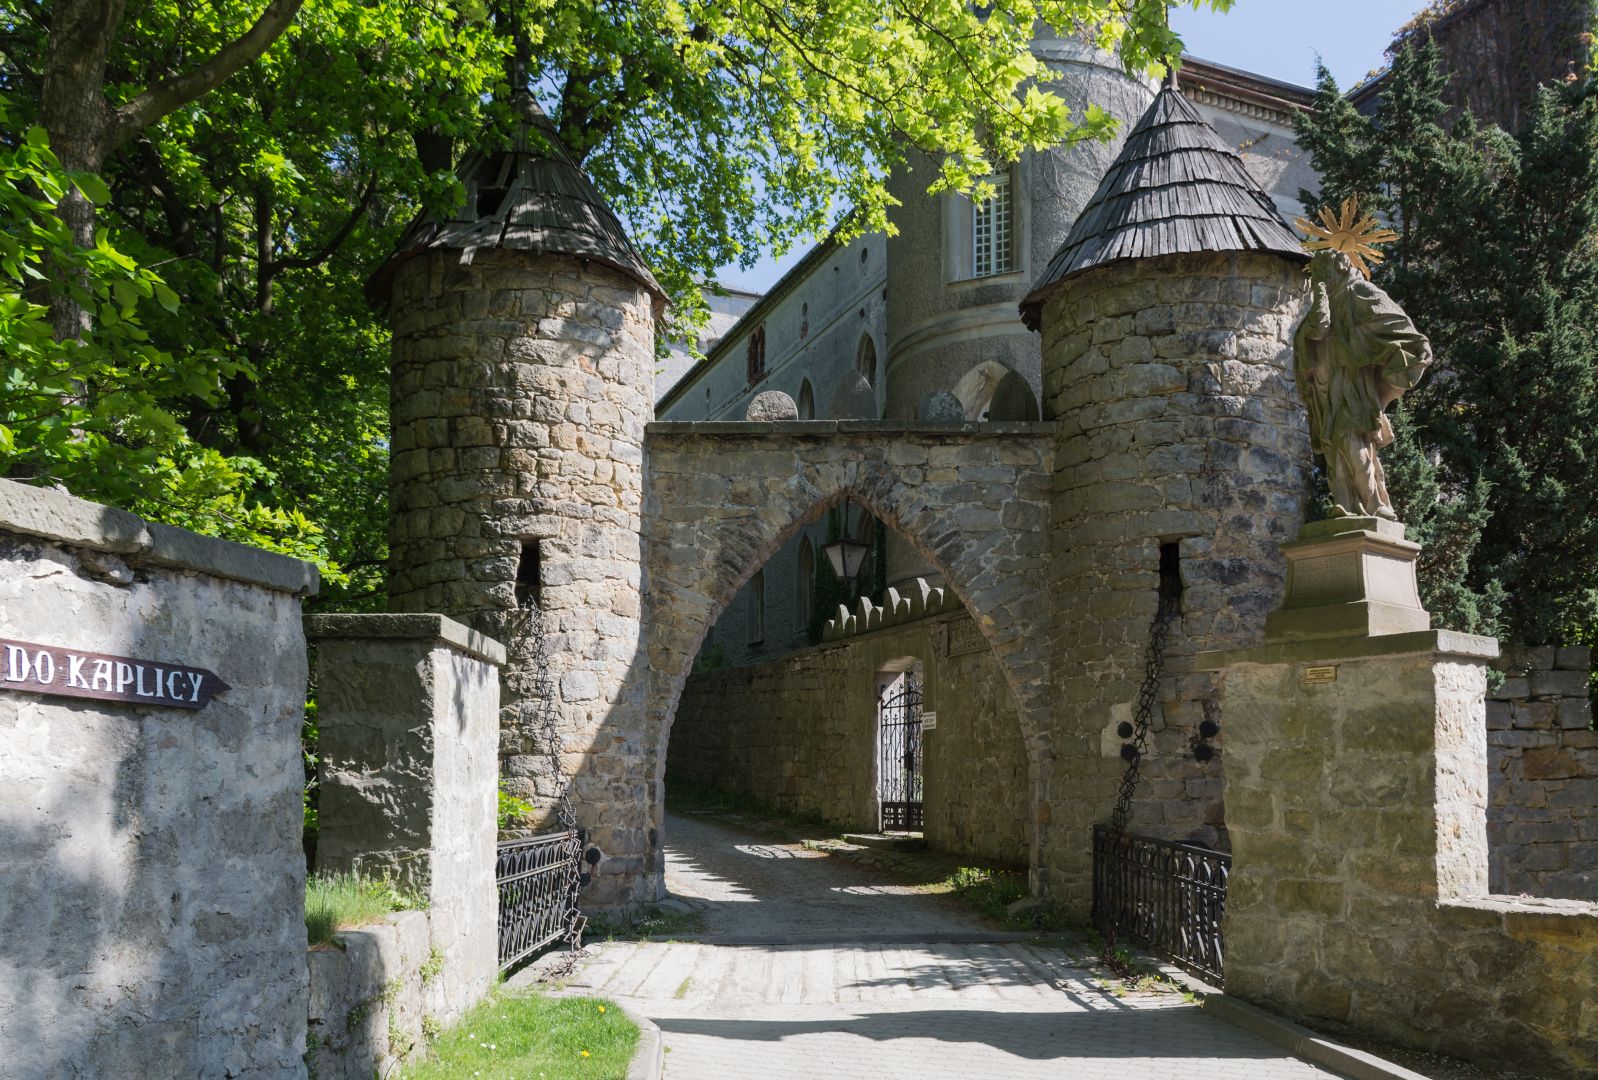 Entrance gate to the Castle